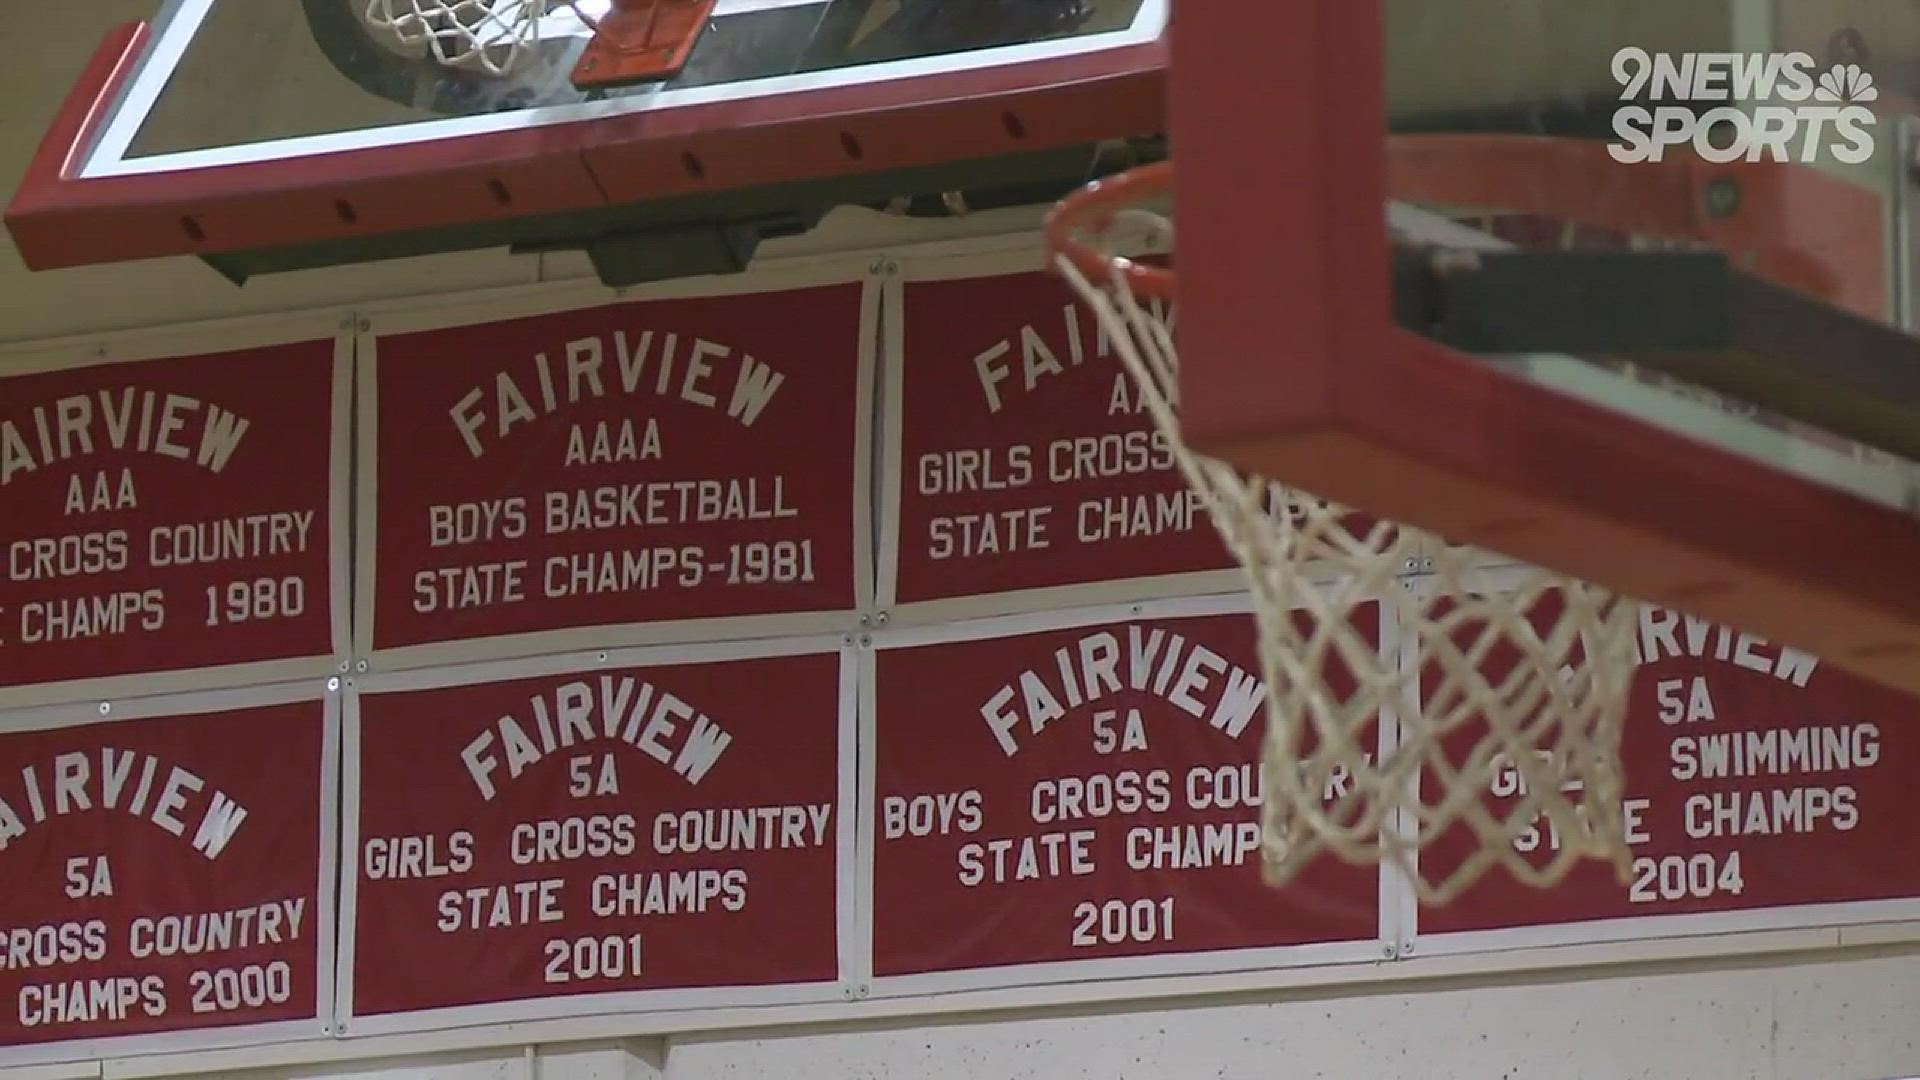 The No. 9 Fairview Knights came out hot against the Fossil Ridge Sabercats and pulled away in the second half for the win 65-45.